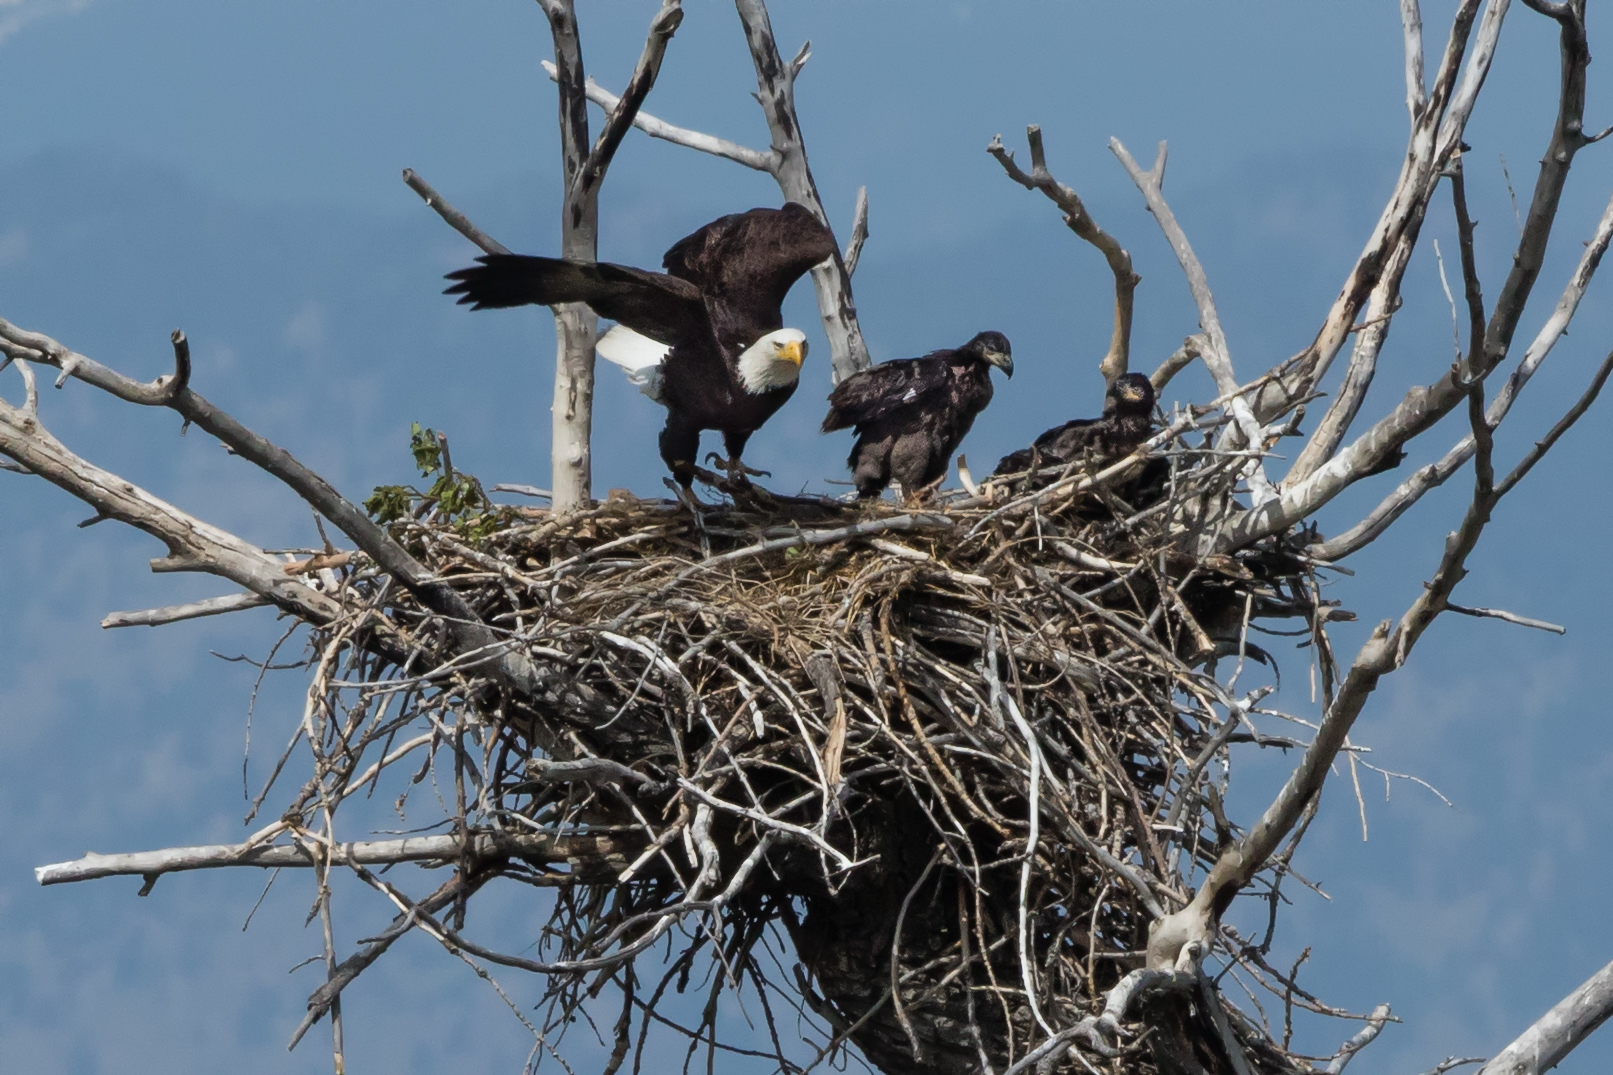 Female and both eaglets in early May, 2017, just prior to nest collapse on May 22. 